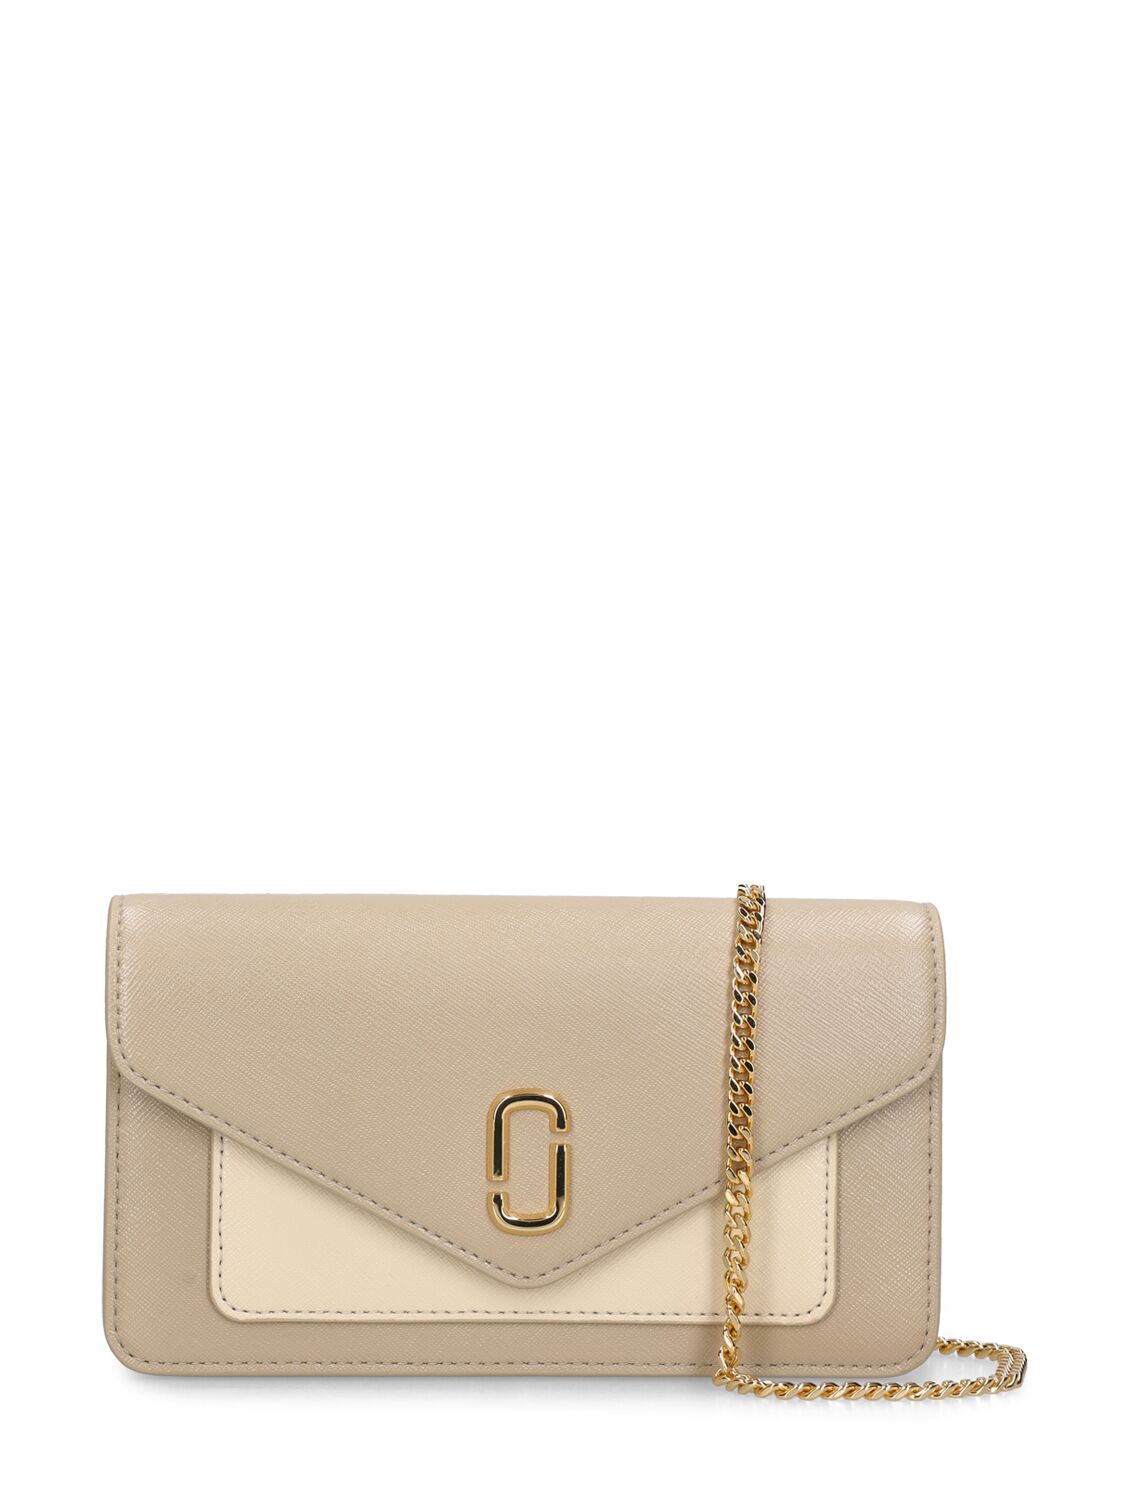 MARC JACOBS THE LEATHER ENVELOPE CHAIN WALLET